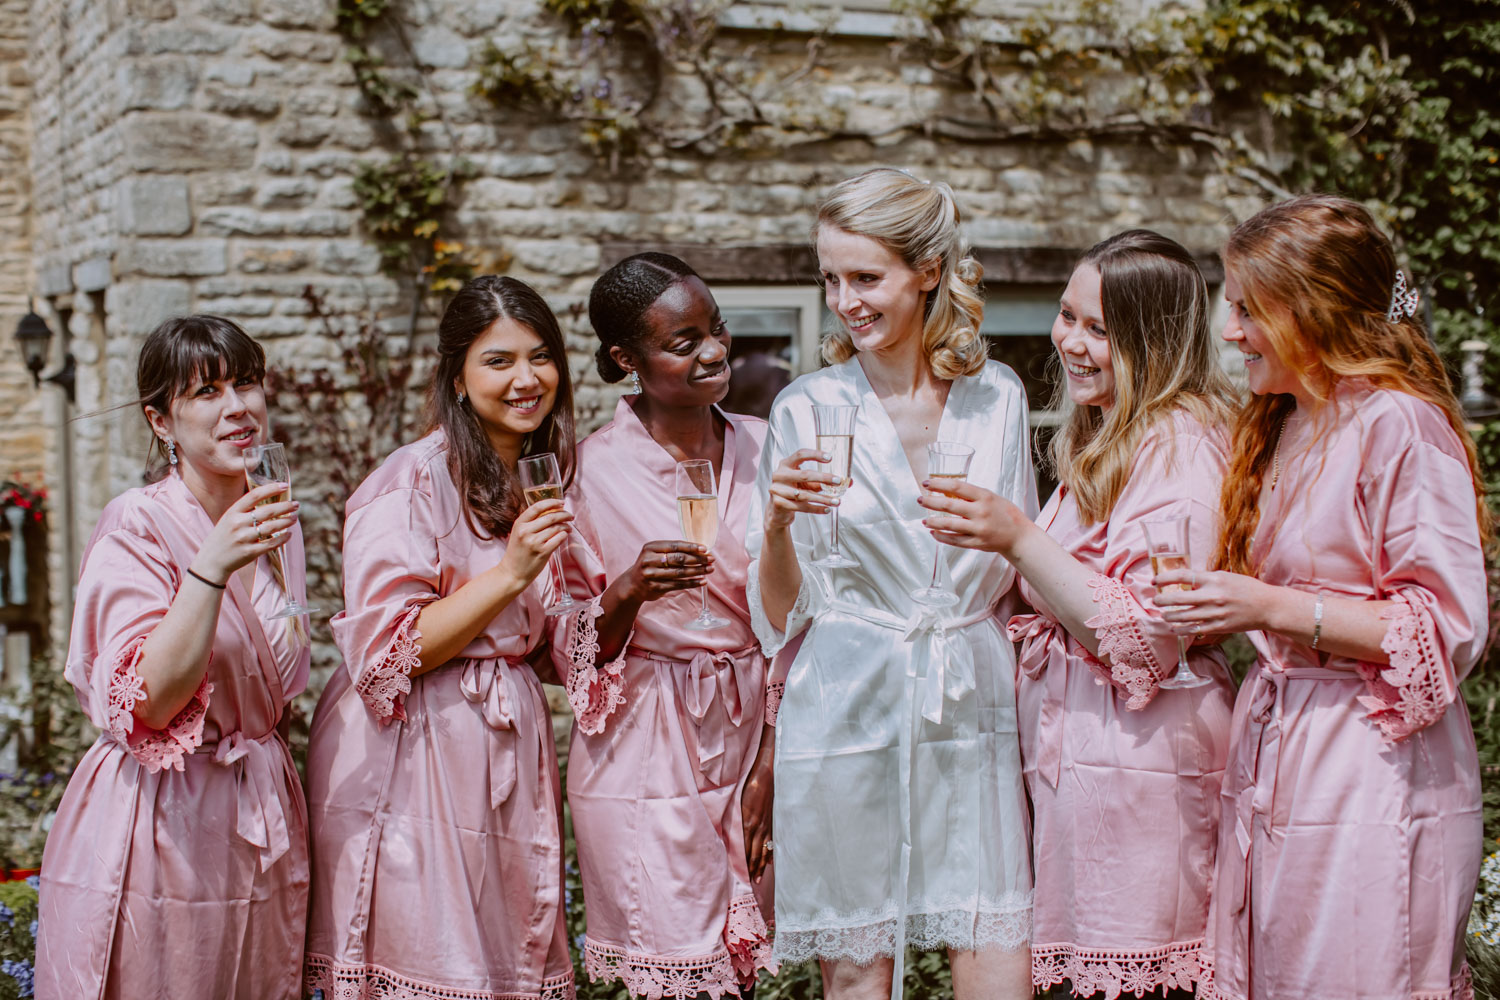 Bride and her bridesmaids group photo in ropes holding a glass of bubbly